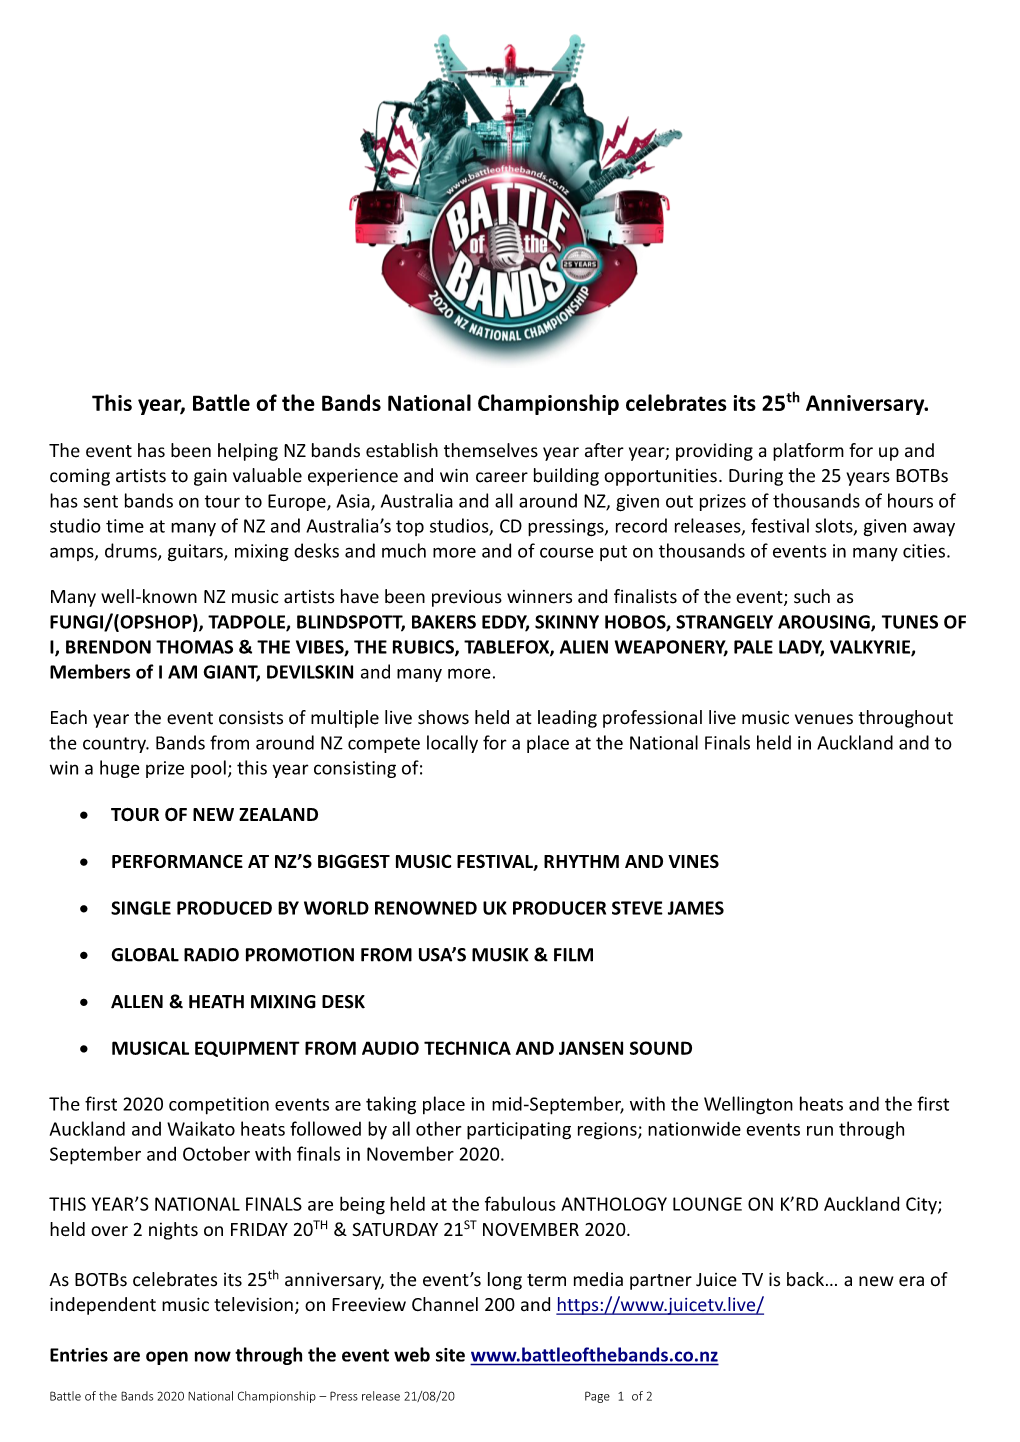 This Year, Battle of the Bands National Championship Celebrates Its 25Th Anniversary